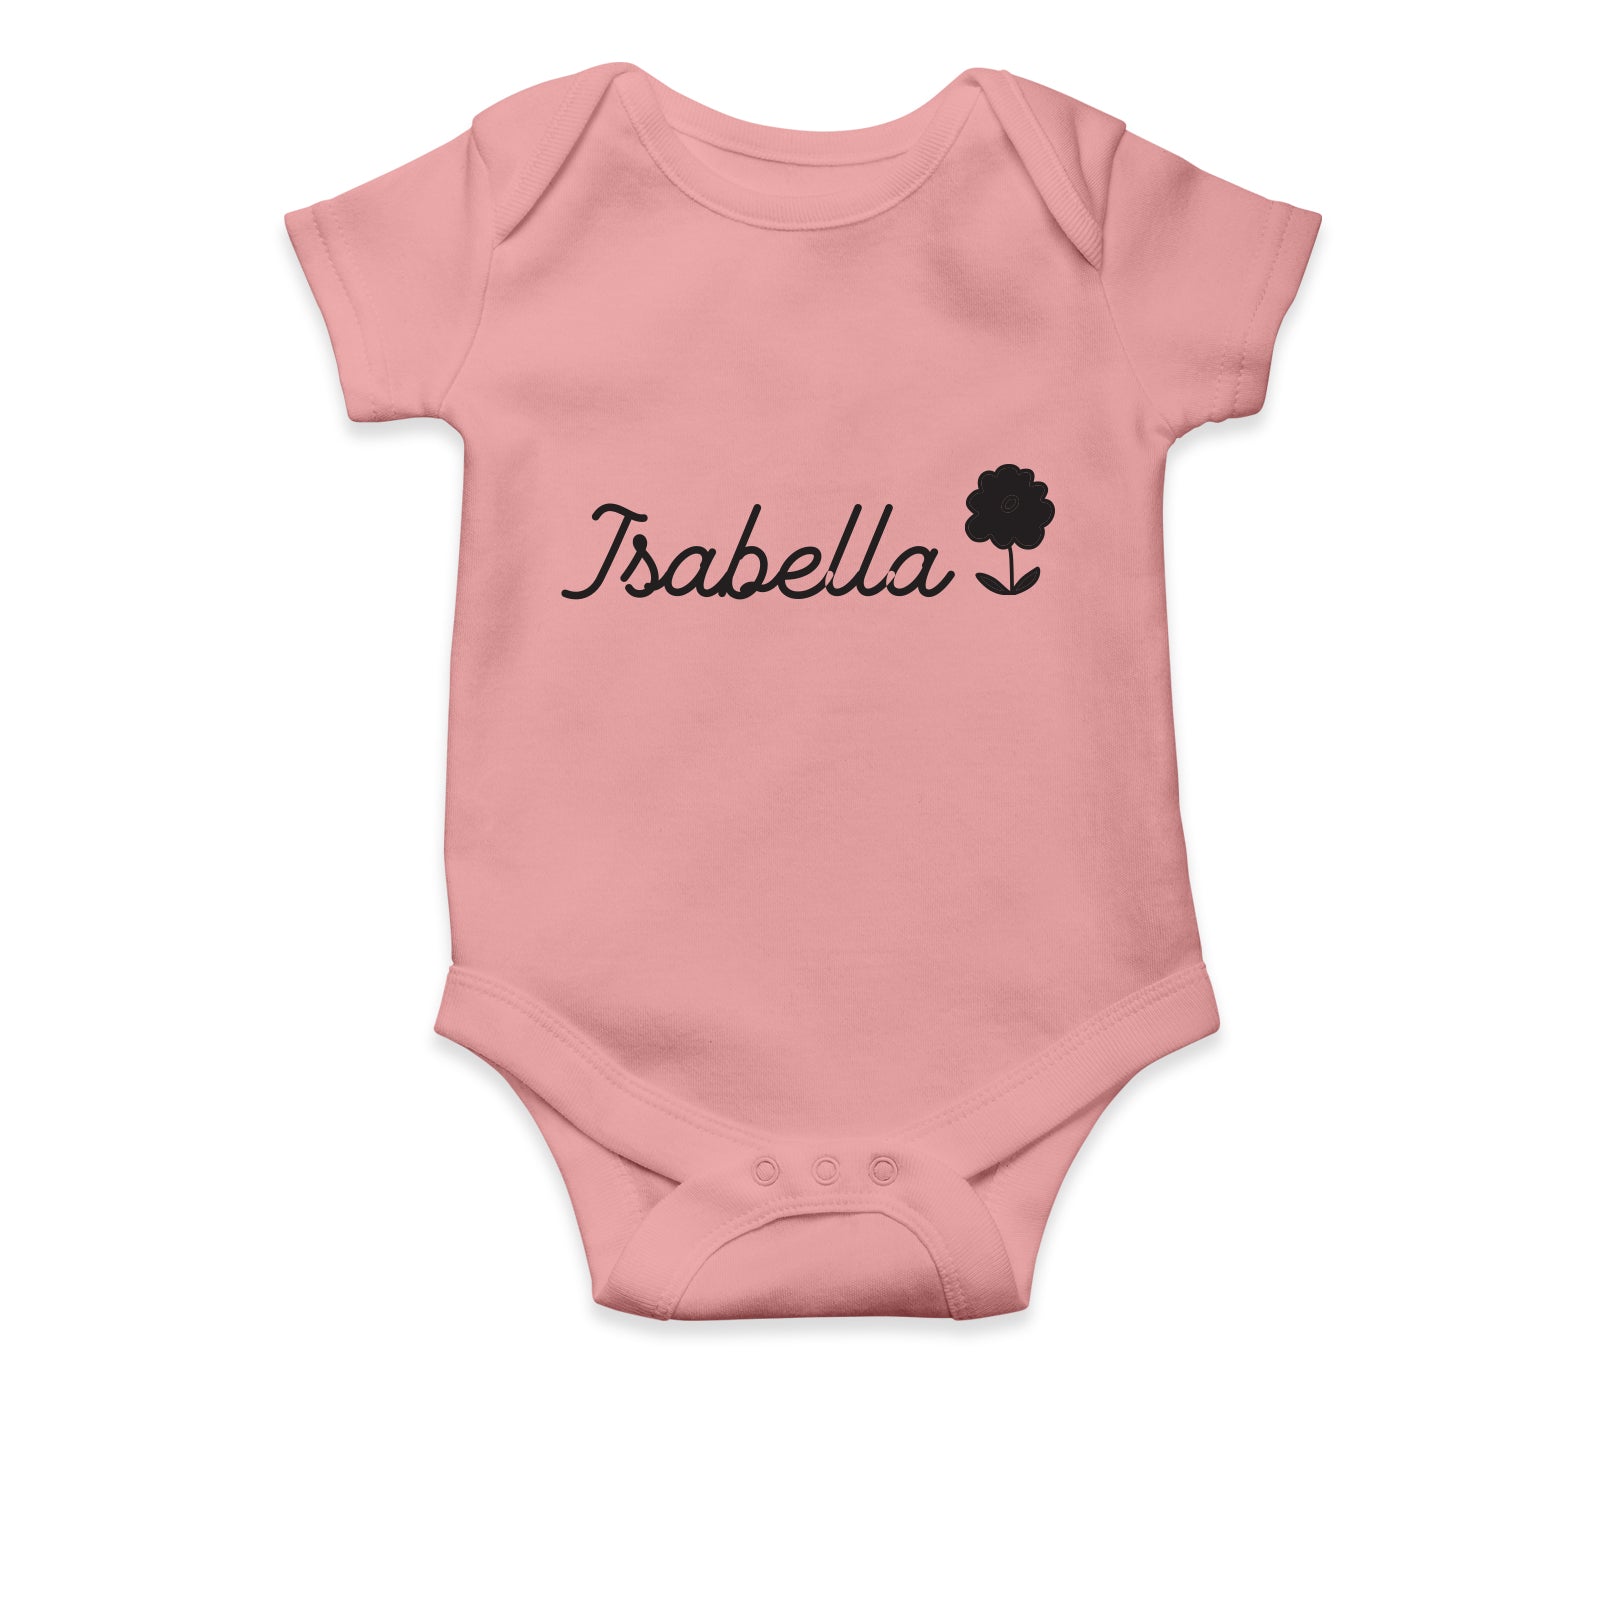 Personalised White Baby Body Suit Grow Vest - Daisy